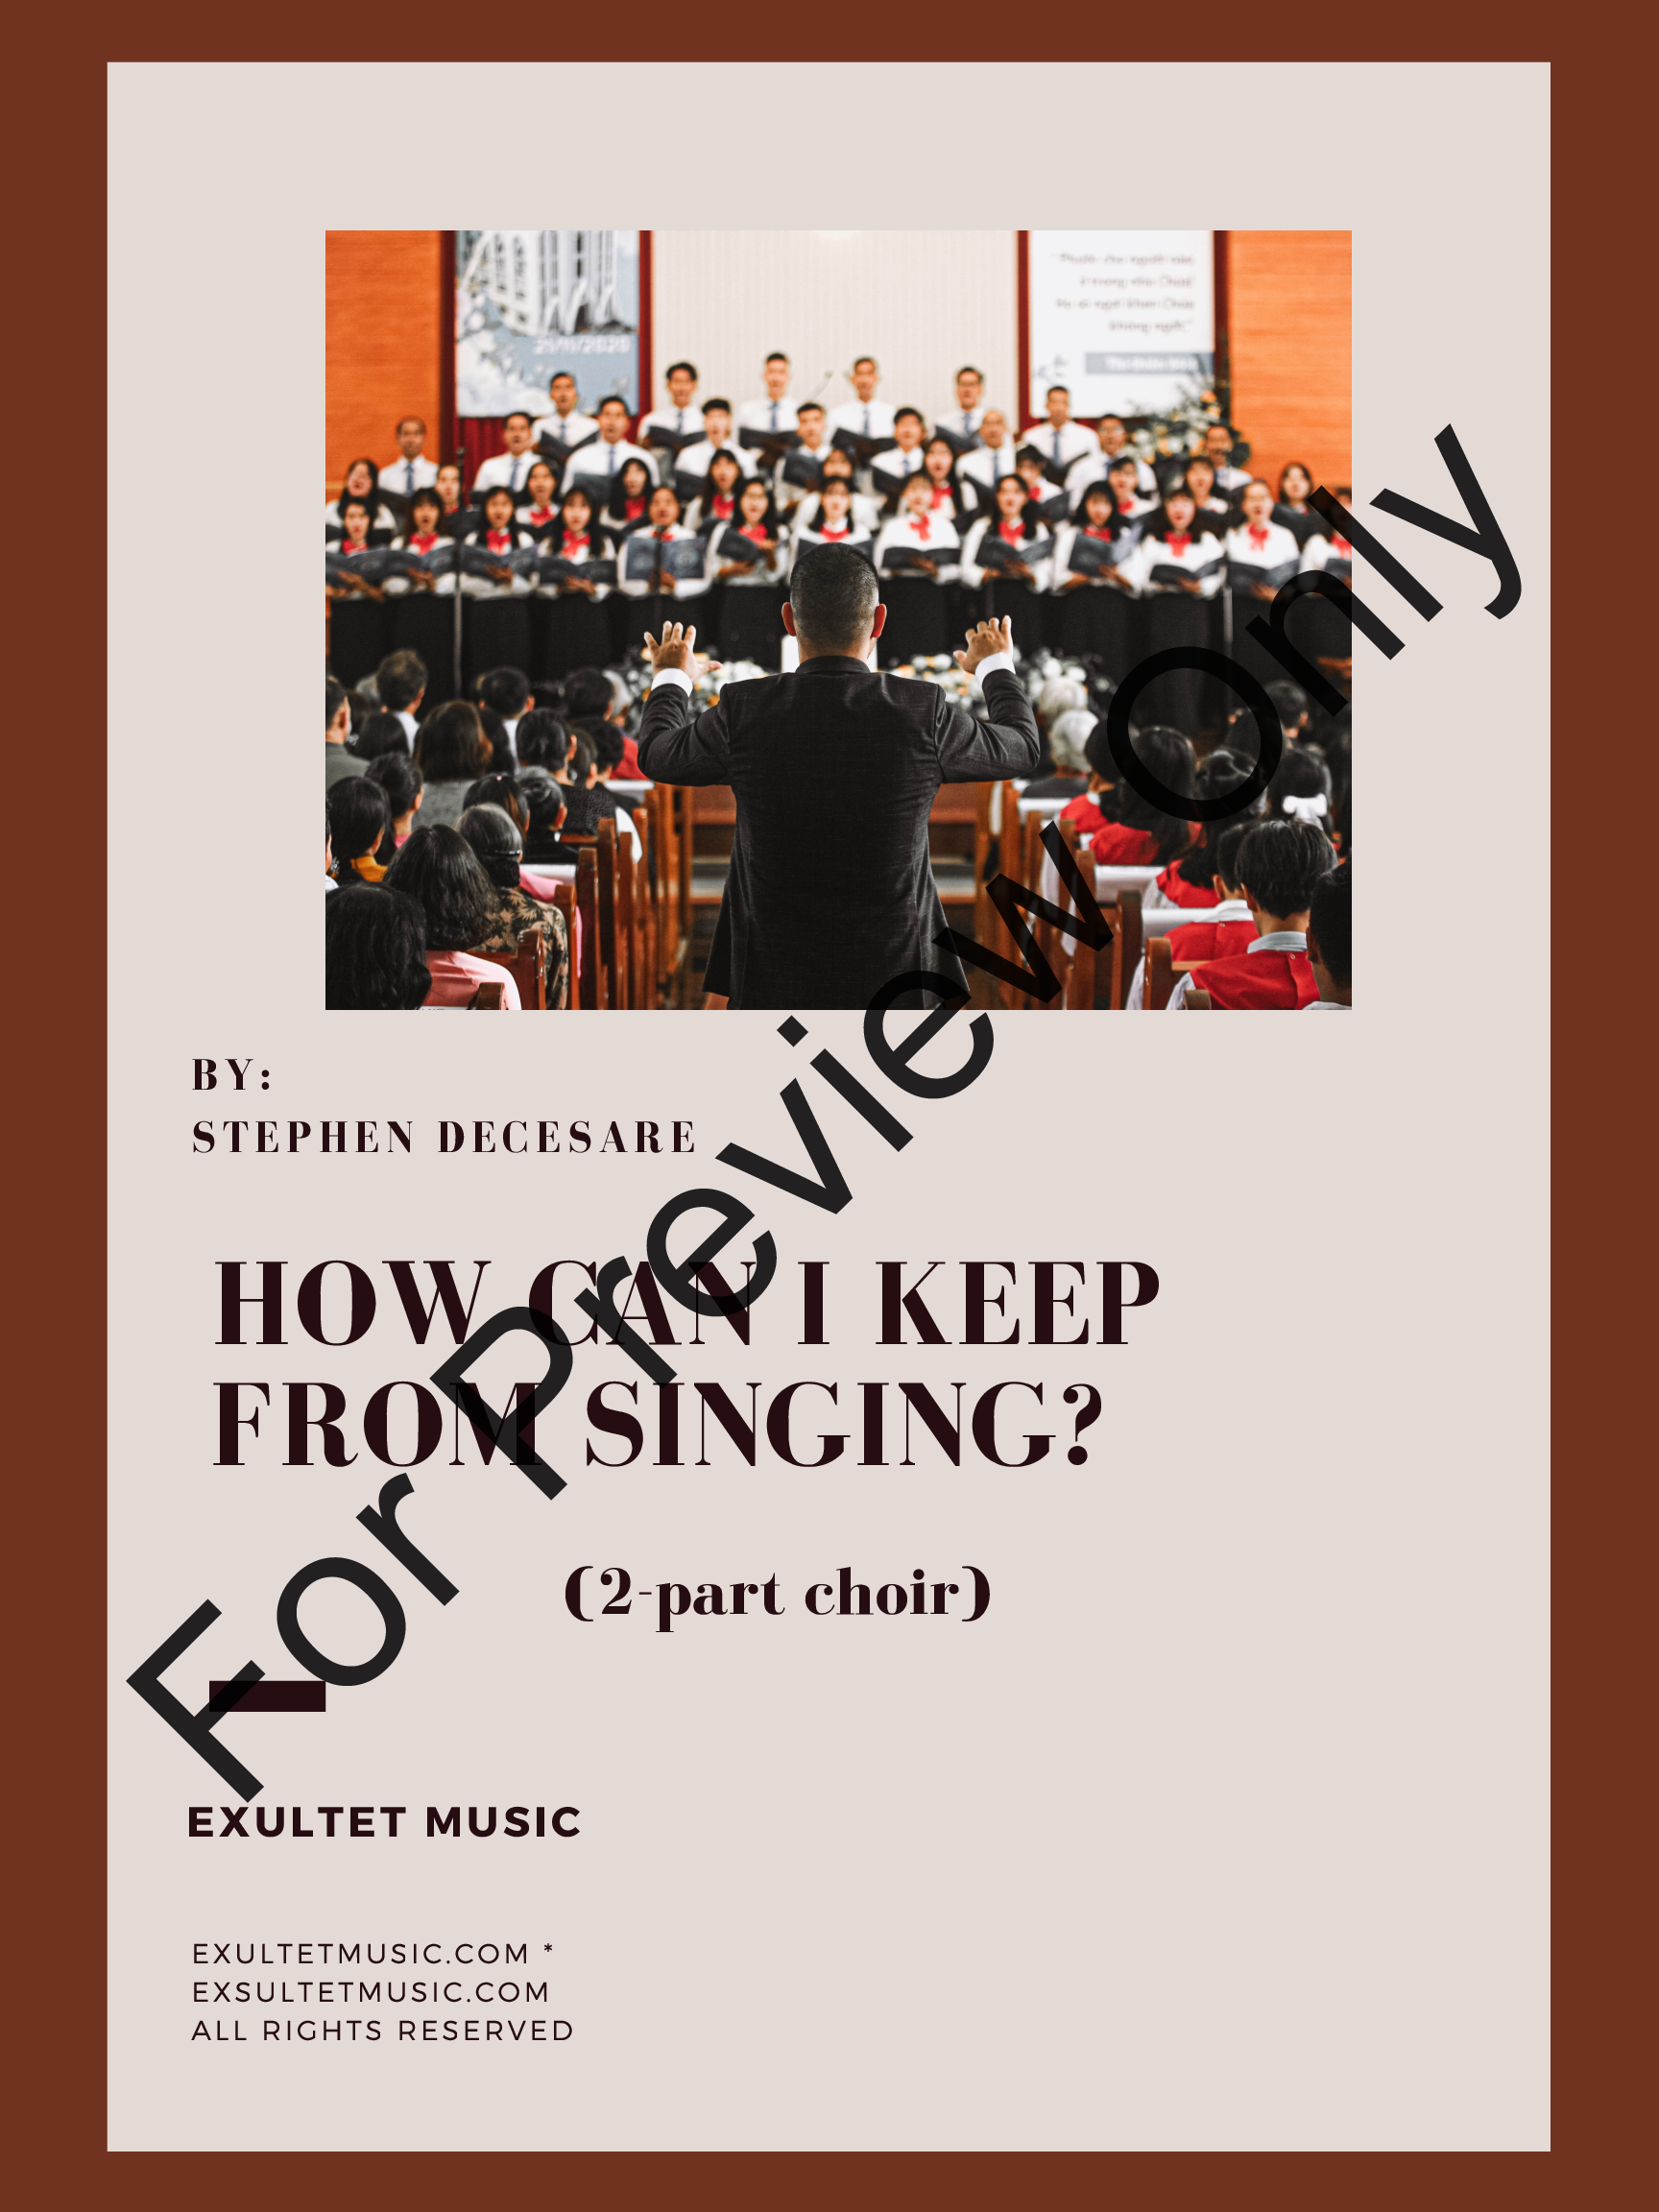 How Can I Keep From Singing? (2-part choir) P.O.D.